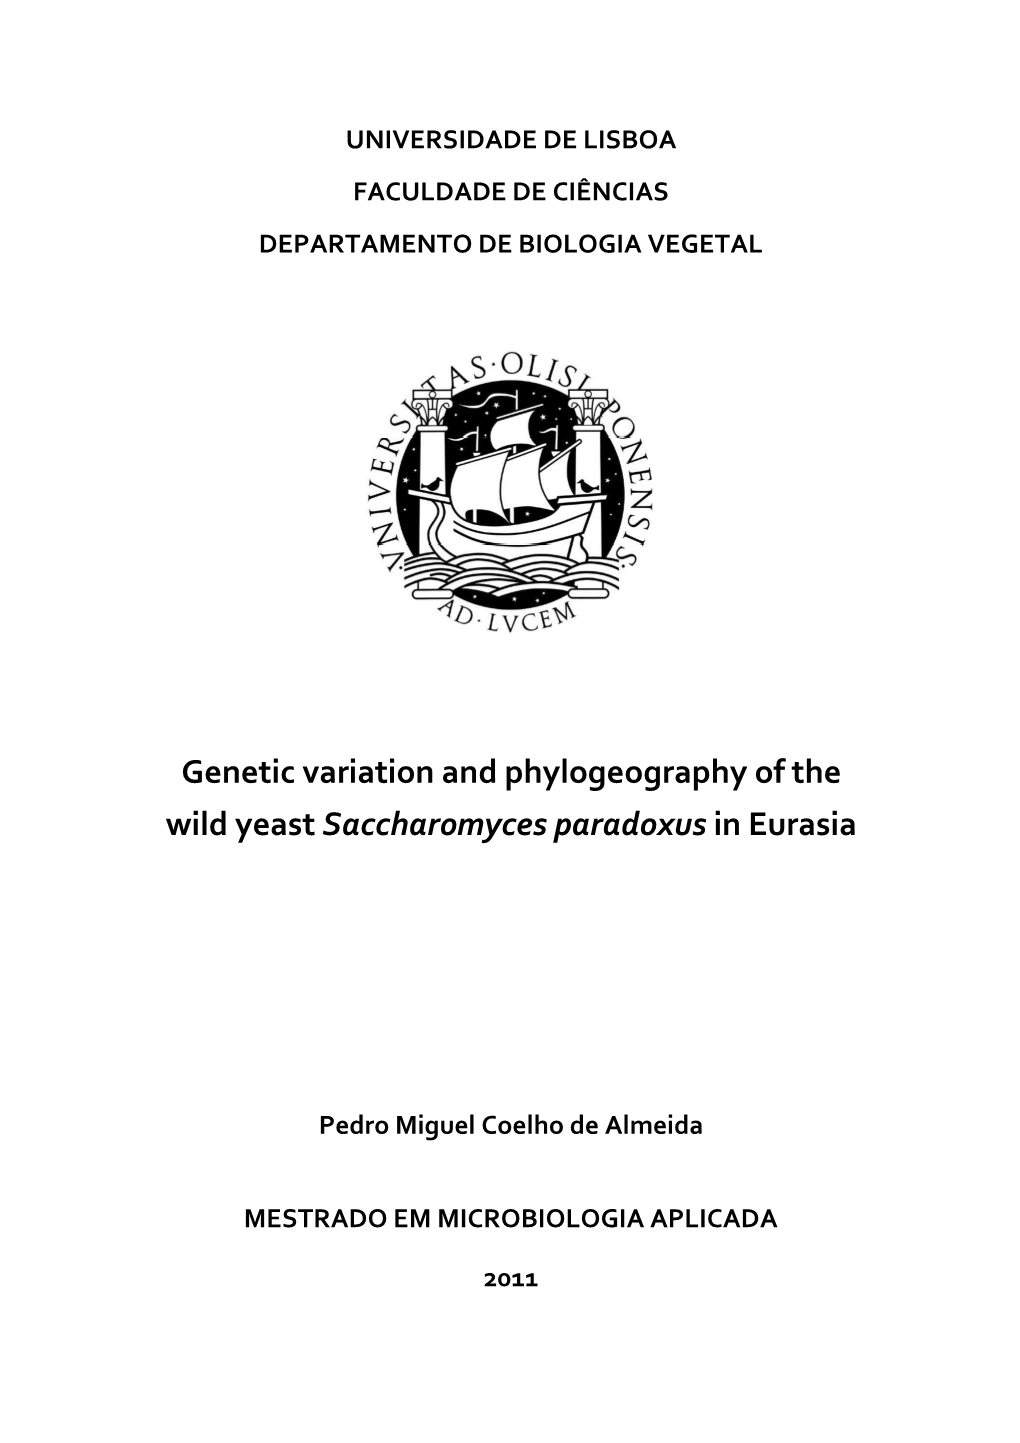 Genetic Variation and Phylogeography of the Wild Yeast Saccharomyces Paradoxus in Eurasia